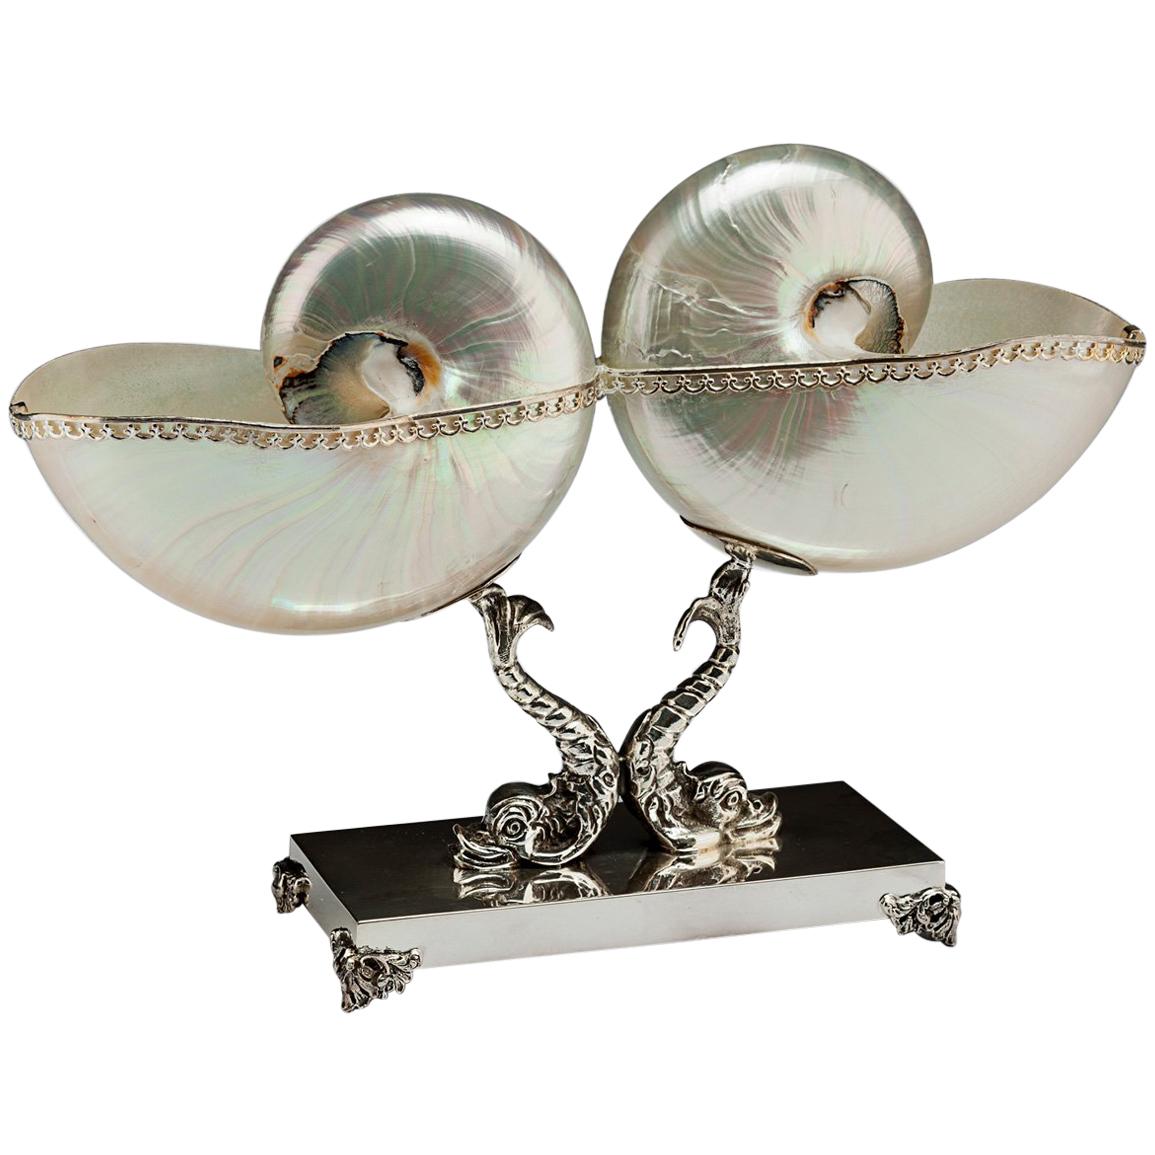 Double Mother of Pearl Nautilus Sea Shells on ‘Triton’ Sterling Silver Base